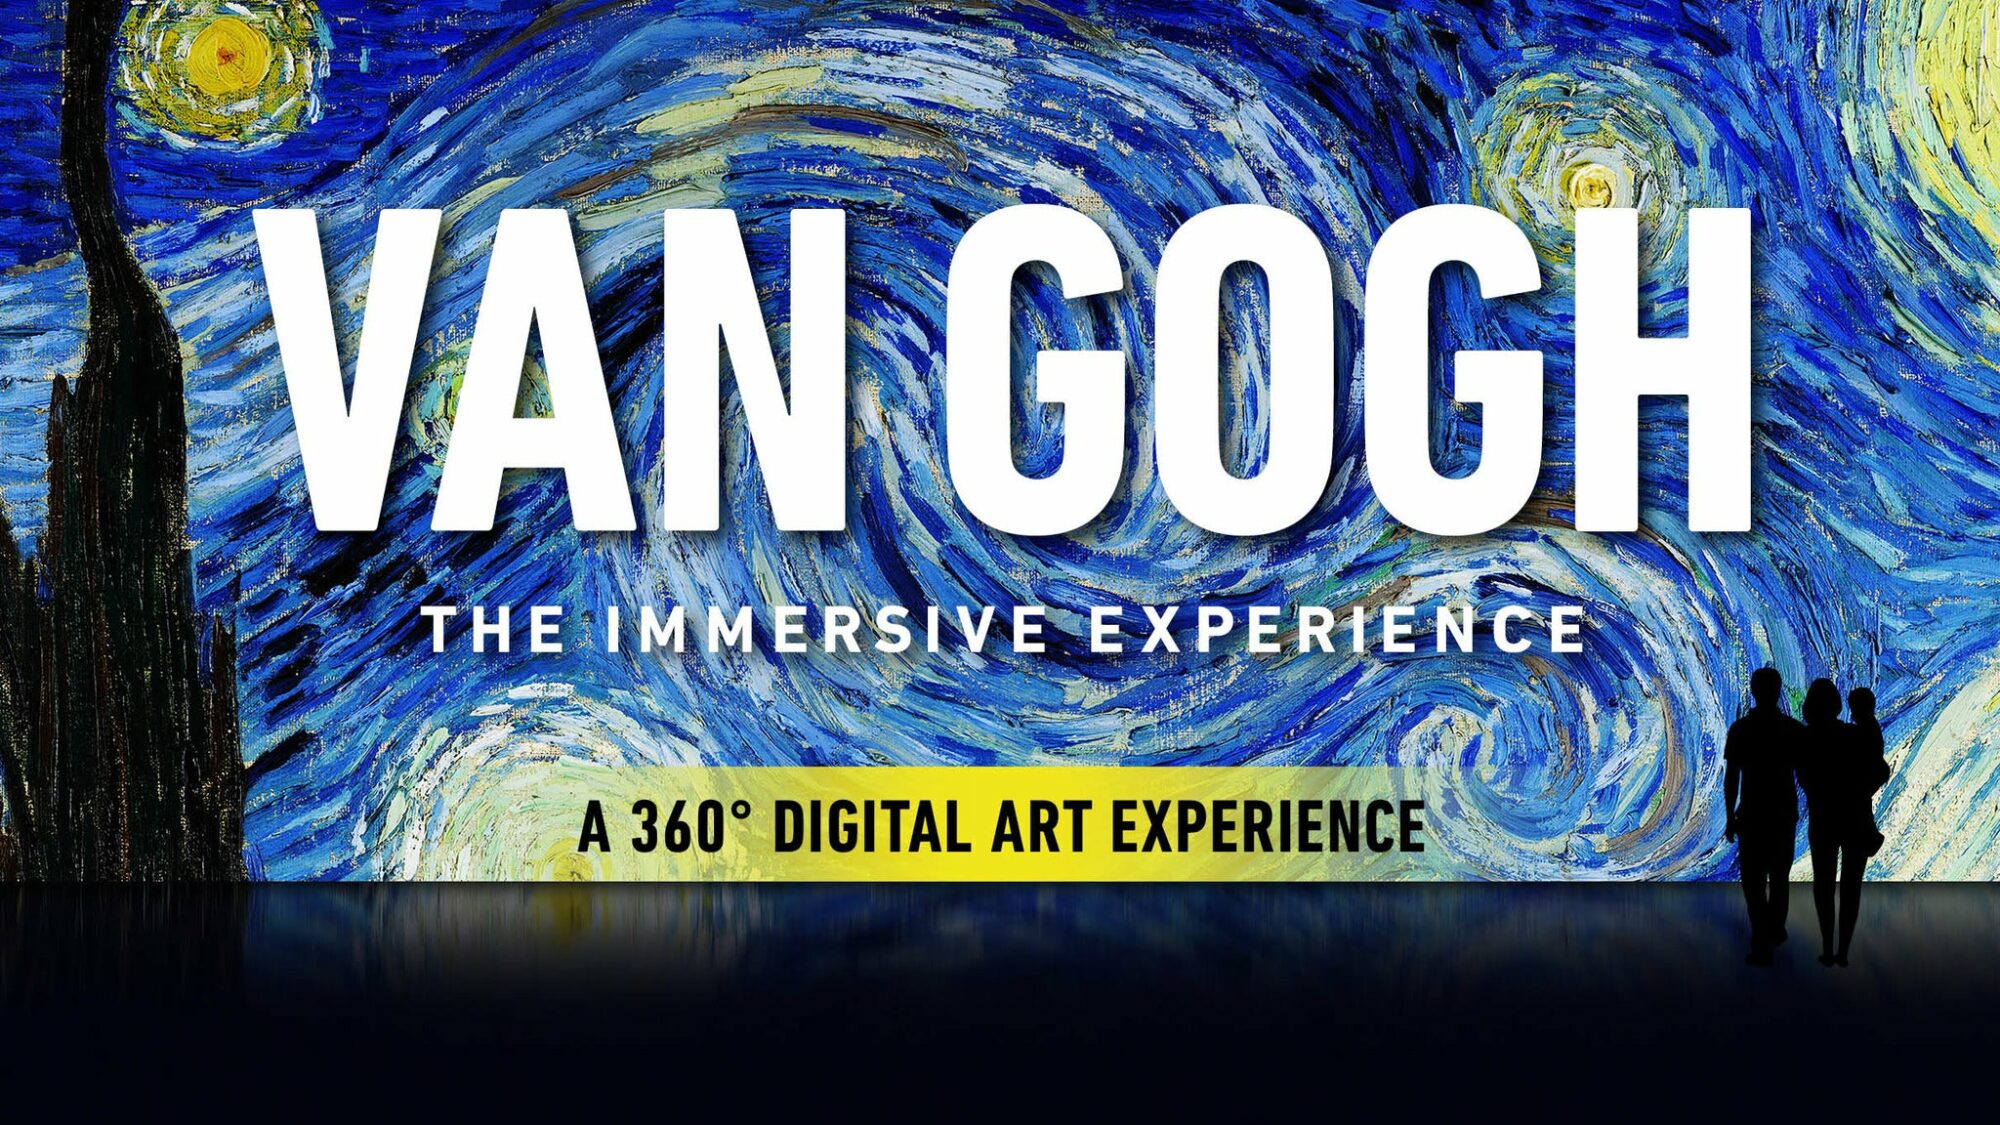 Image name Van Gogh the Immersive Experience York at York St. Marys York the 1 image from the post Van Gogh: the Immersive Experience (York) at York St. Mary's, York in Yorkshire.com.